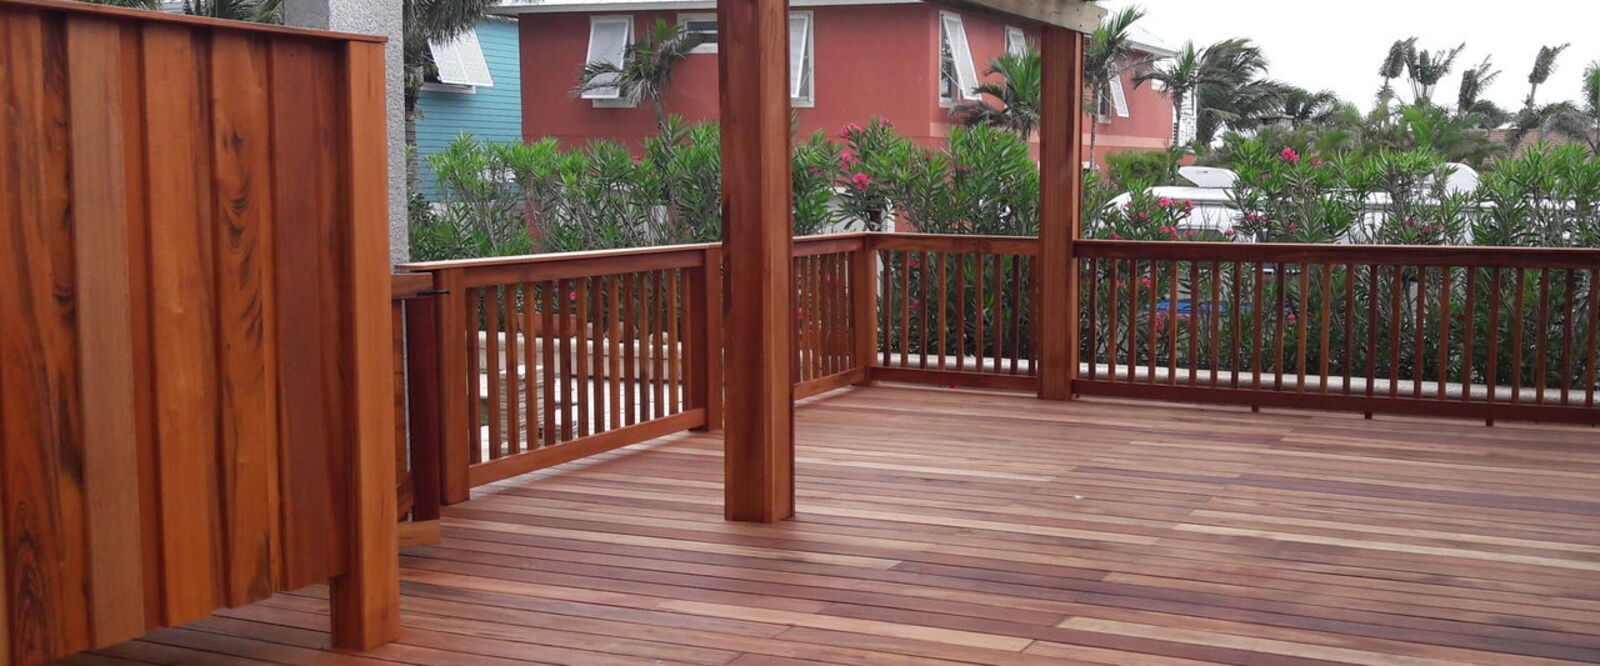 Viking Deck and Fence